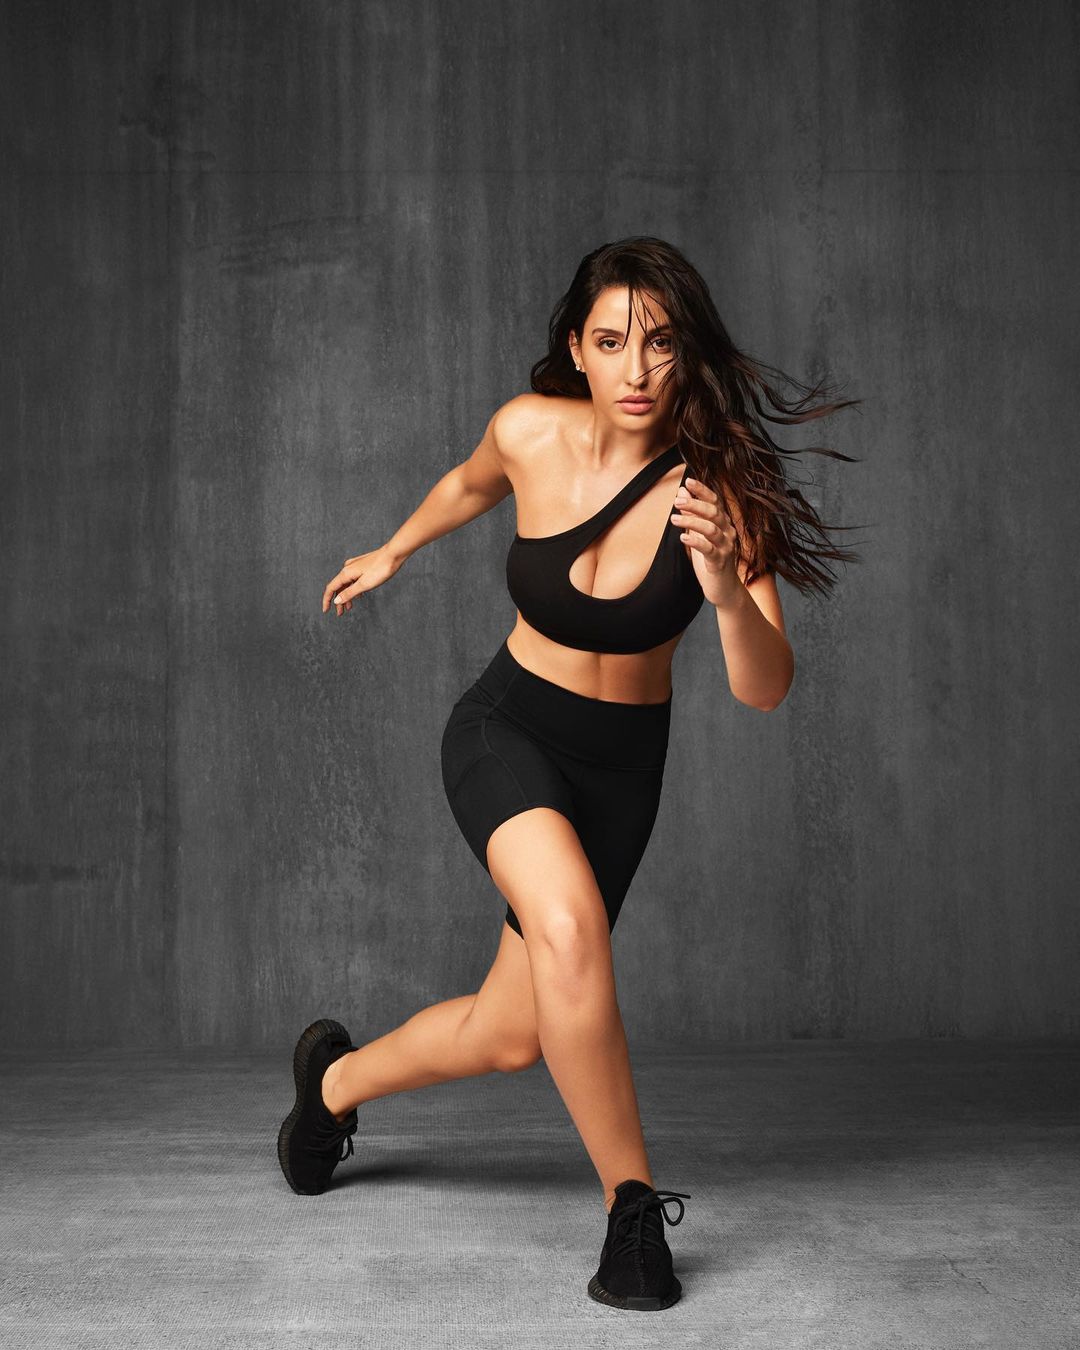 Nora Fatehi raised the temperature with her bold gym look, fans were stunned by her looks 13373